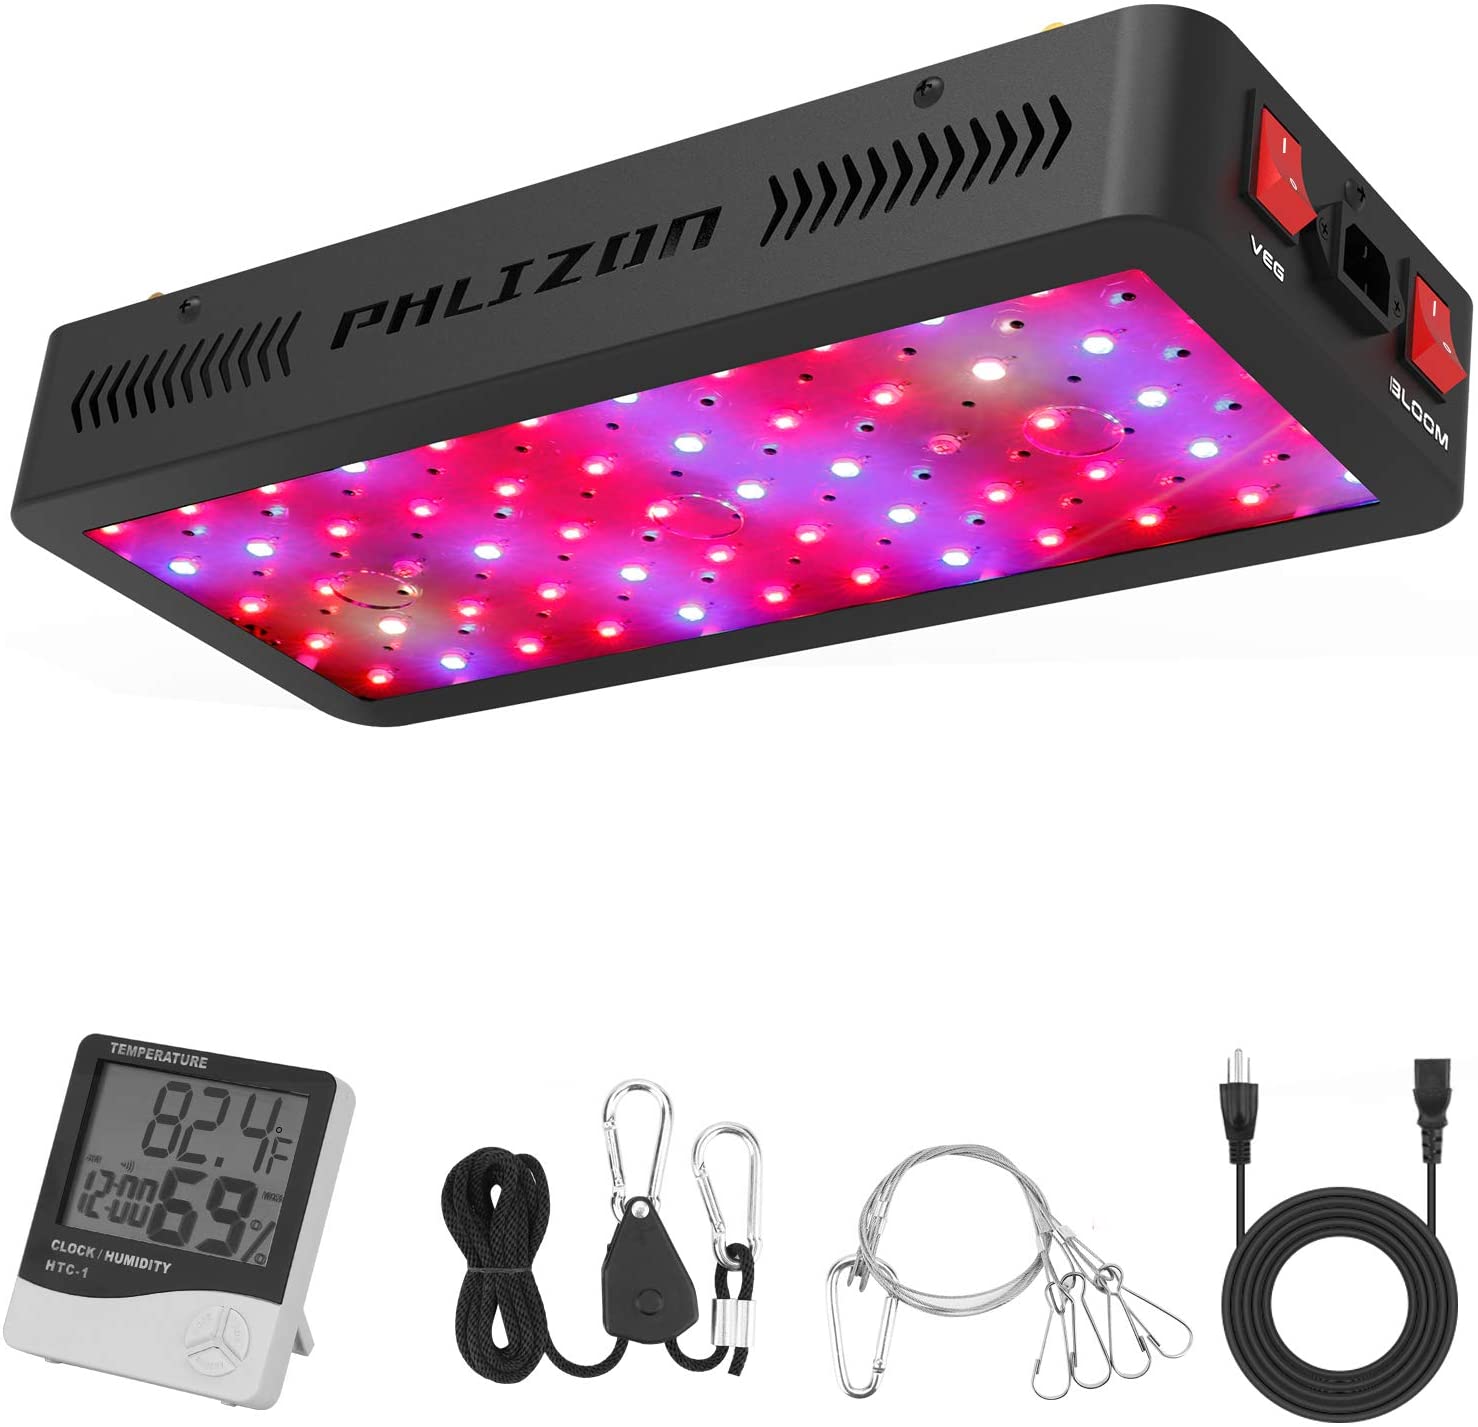 Phlizon 600W LED Plant Grow Light,with Thermometer Humidity Monitor